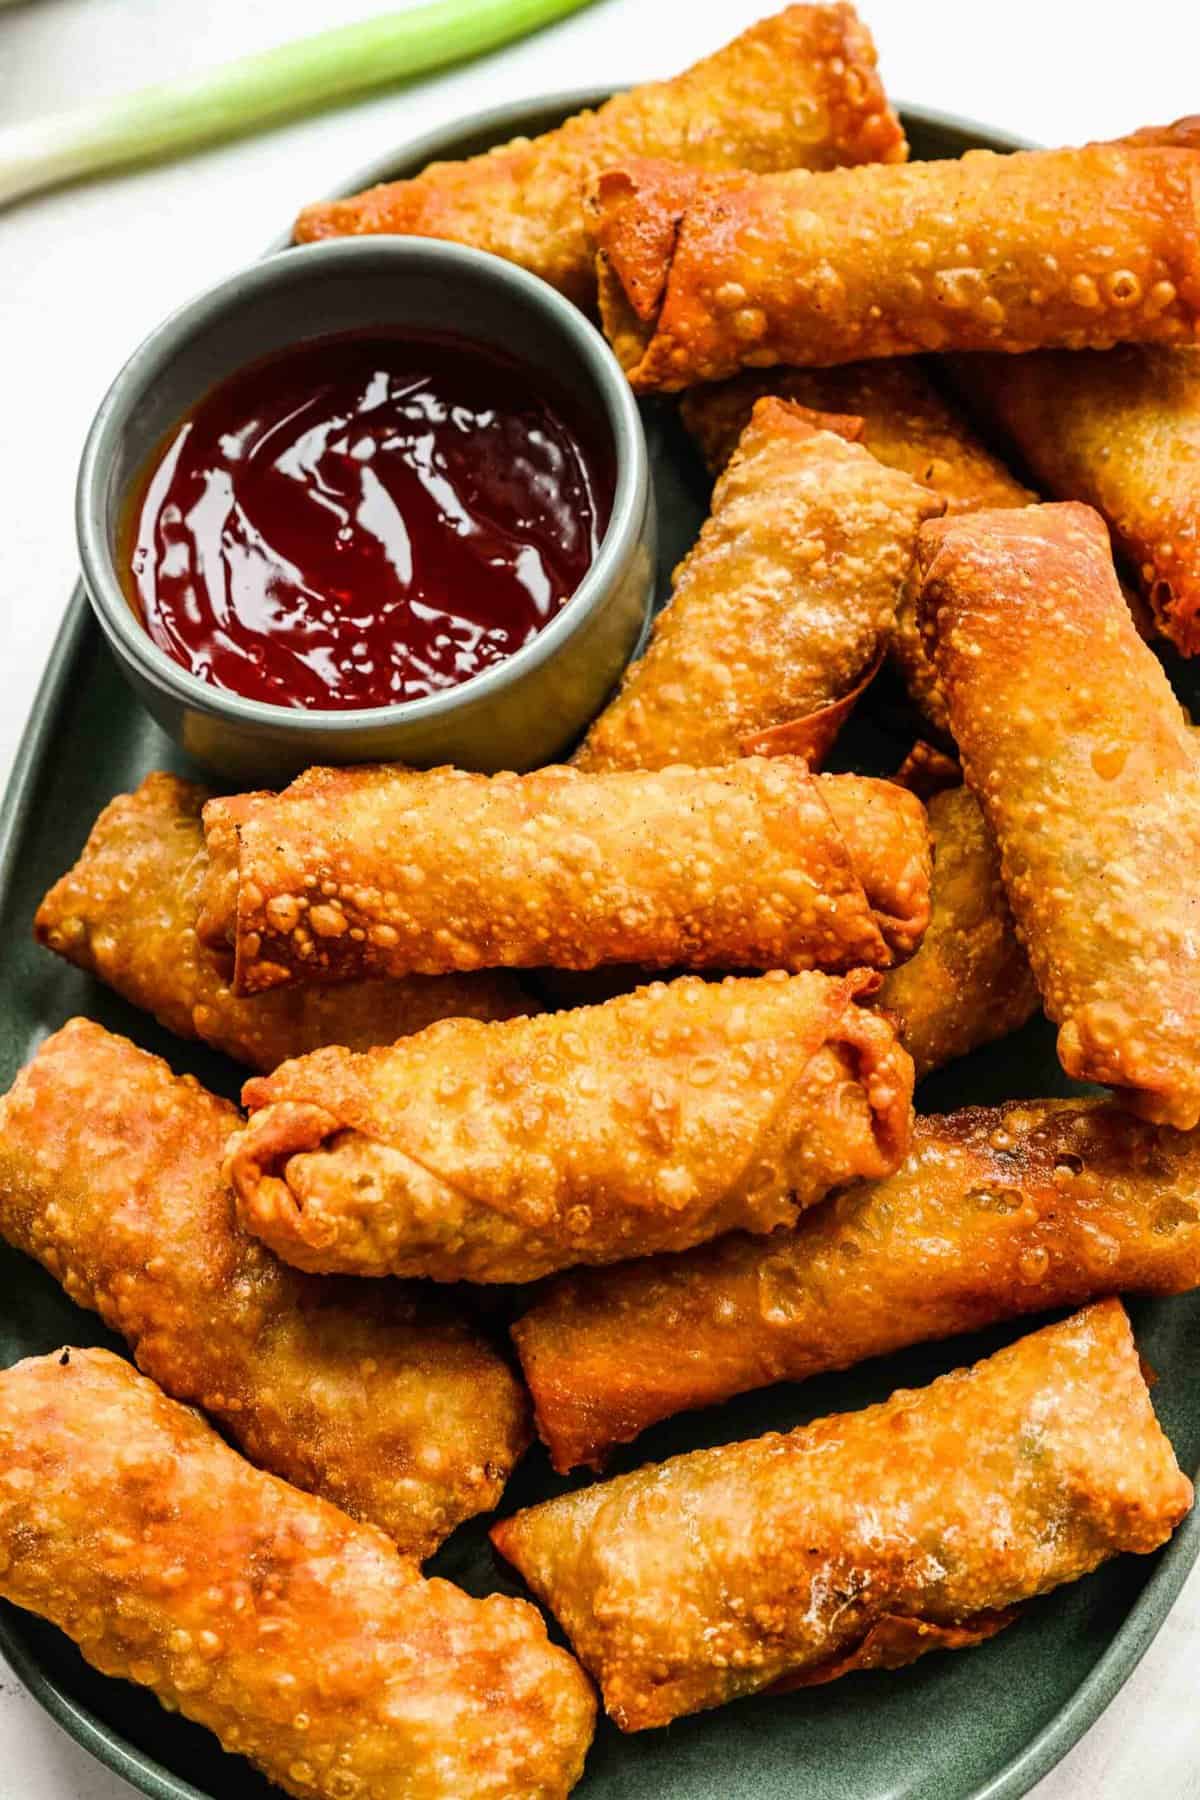 Crispy golden spring rolls on a plate with dipping sauce.